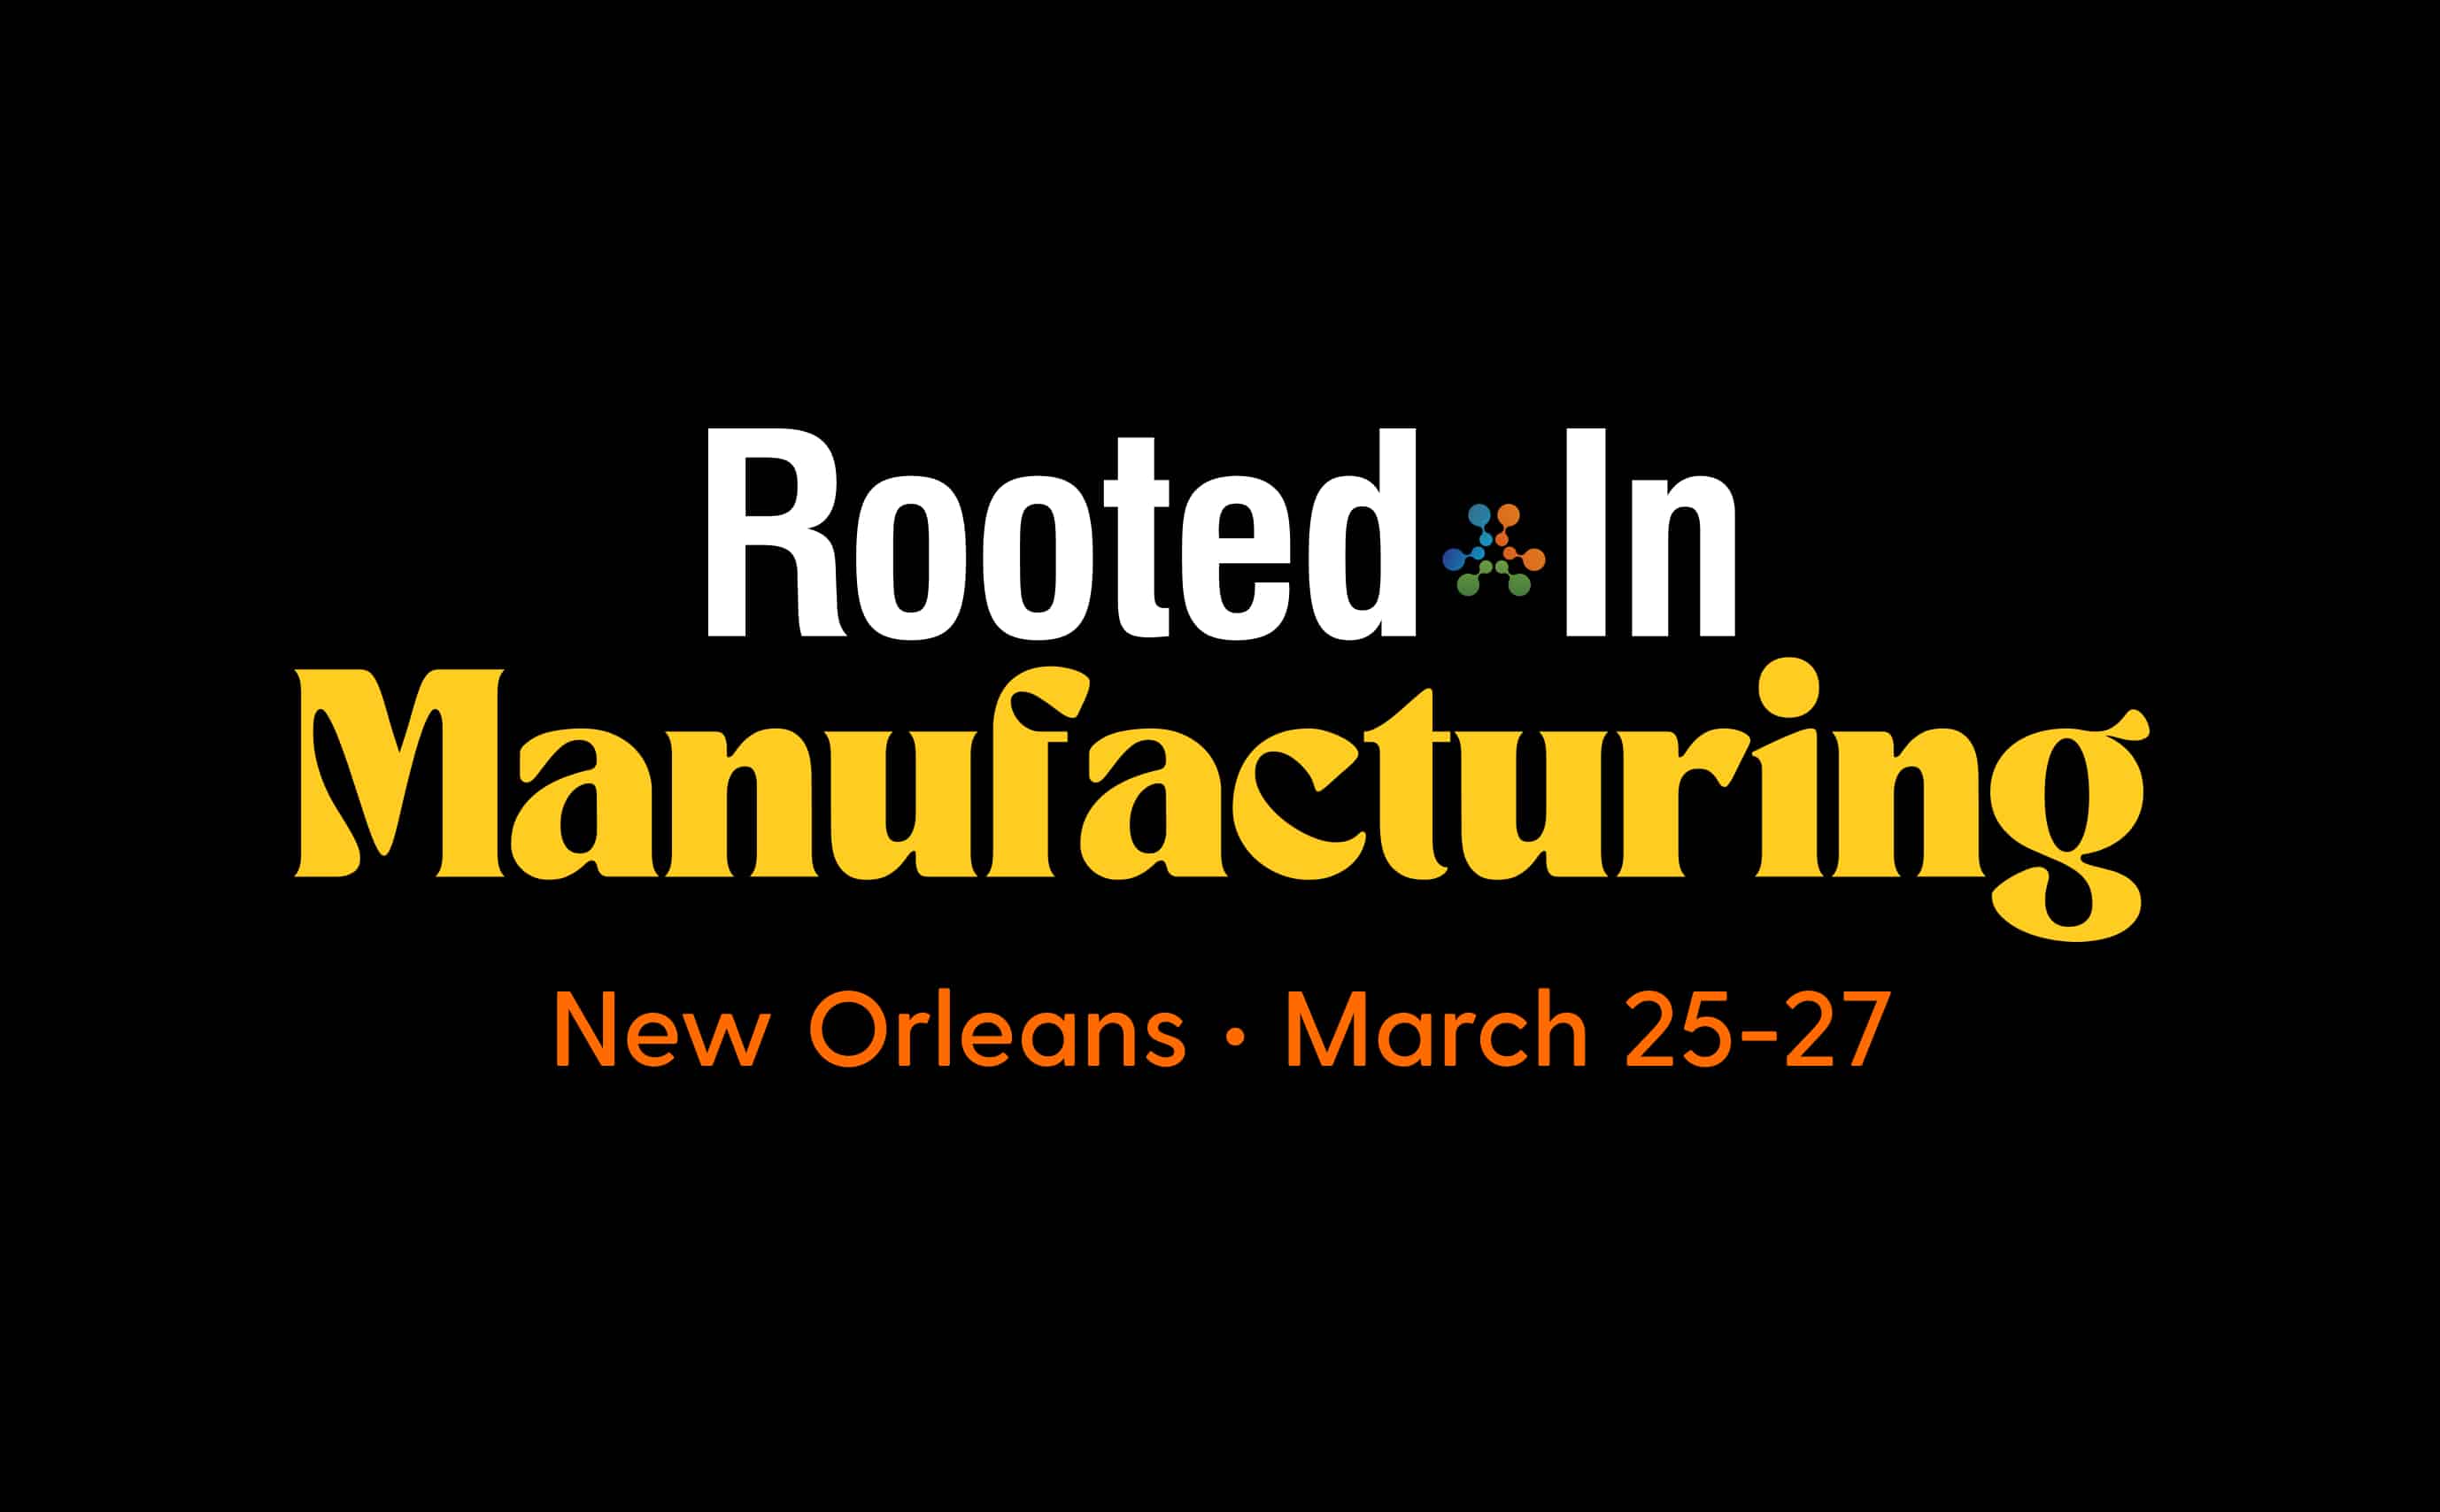  Customer Conference: Rooted•In Manufacturing